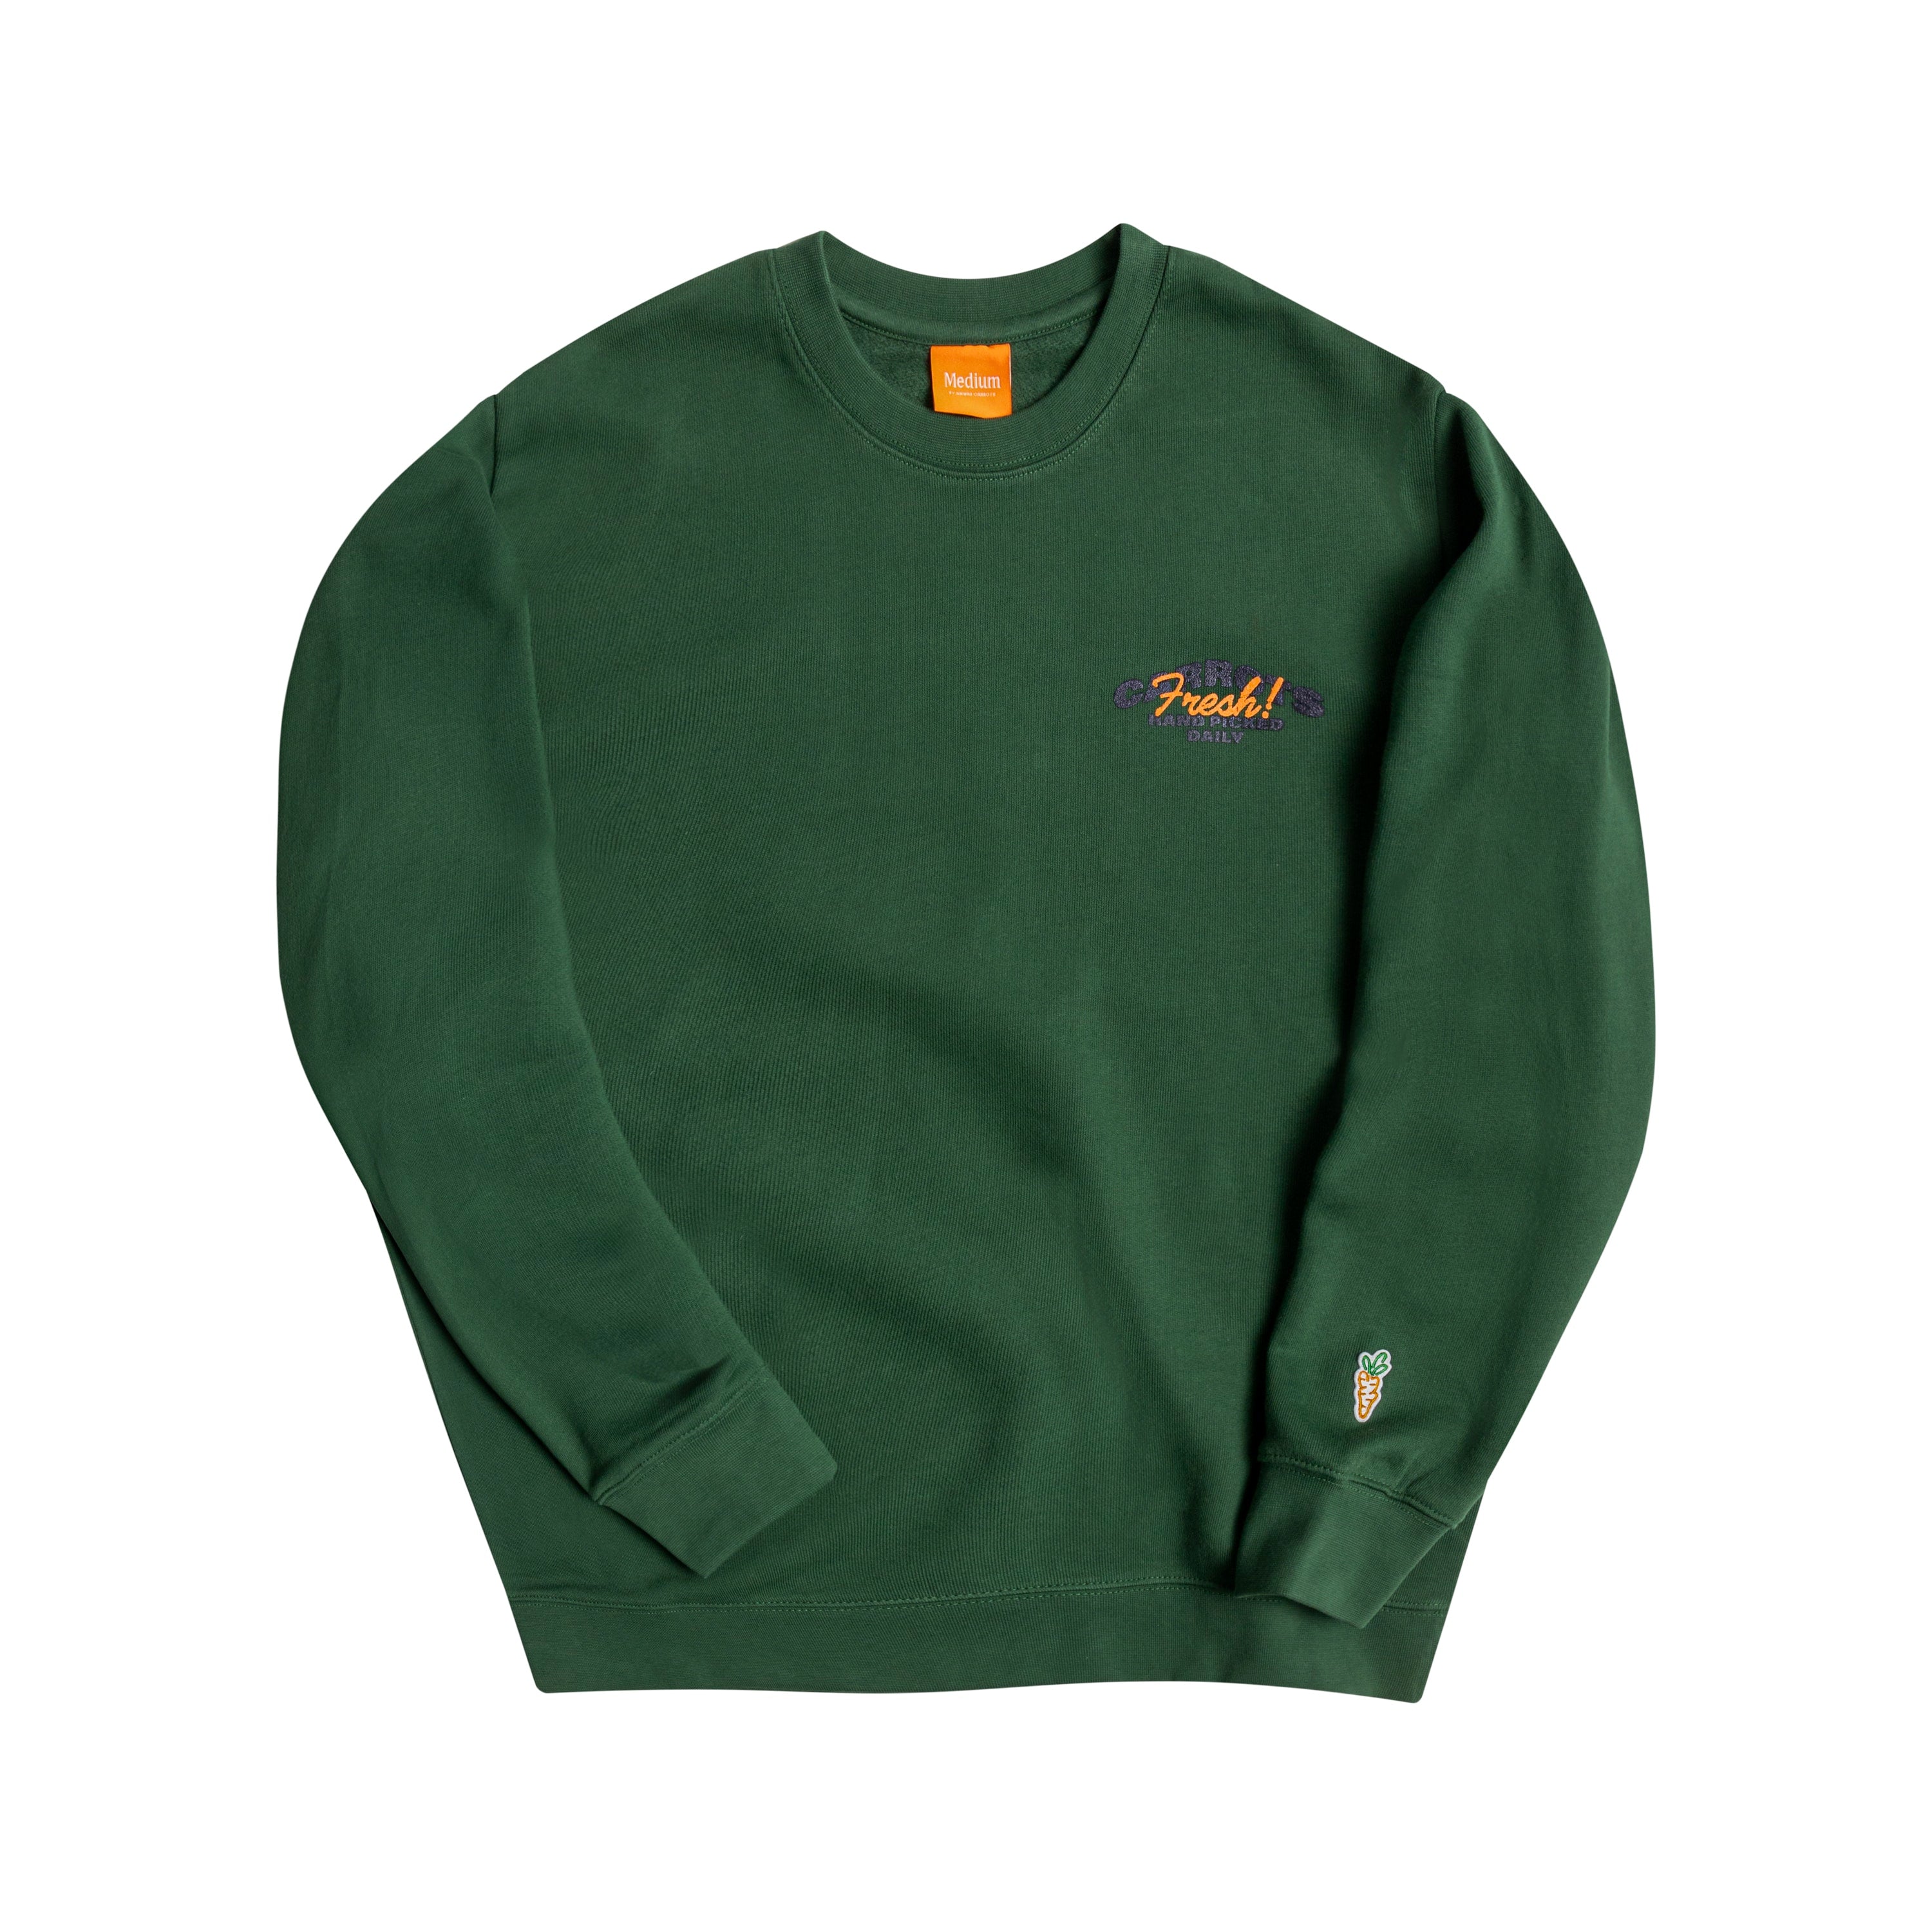 HAND PICKED CREWNECK - FOREST